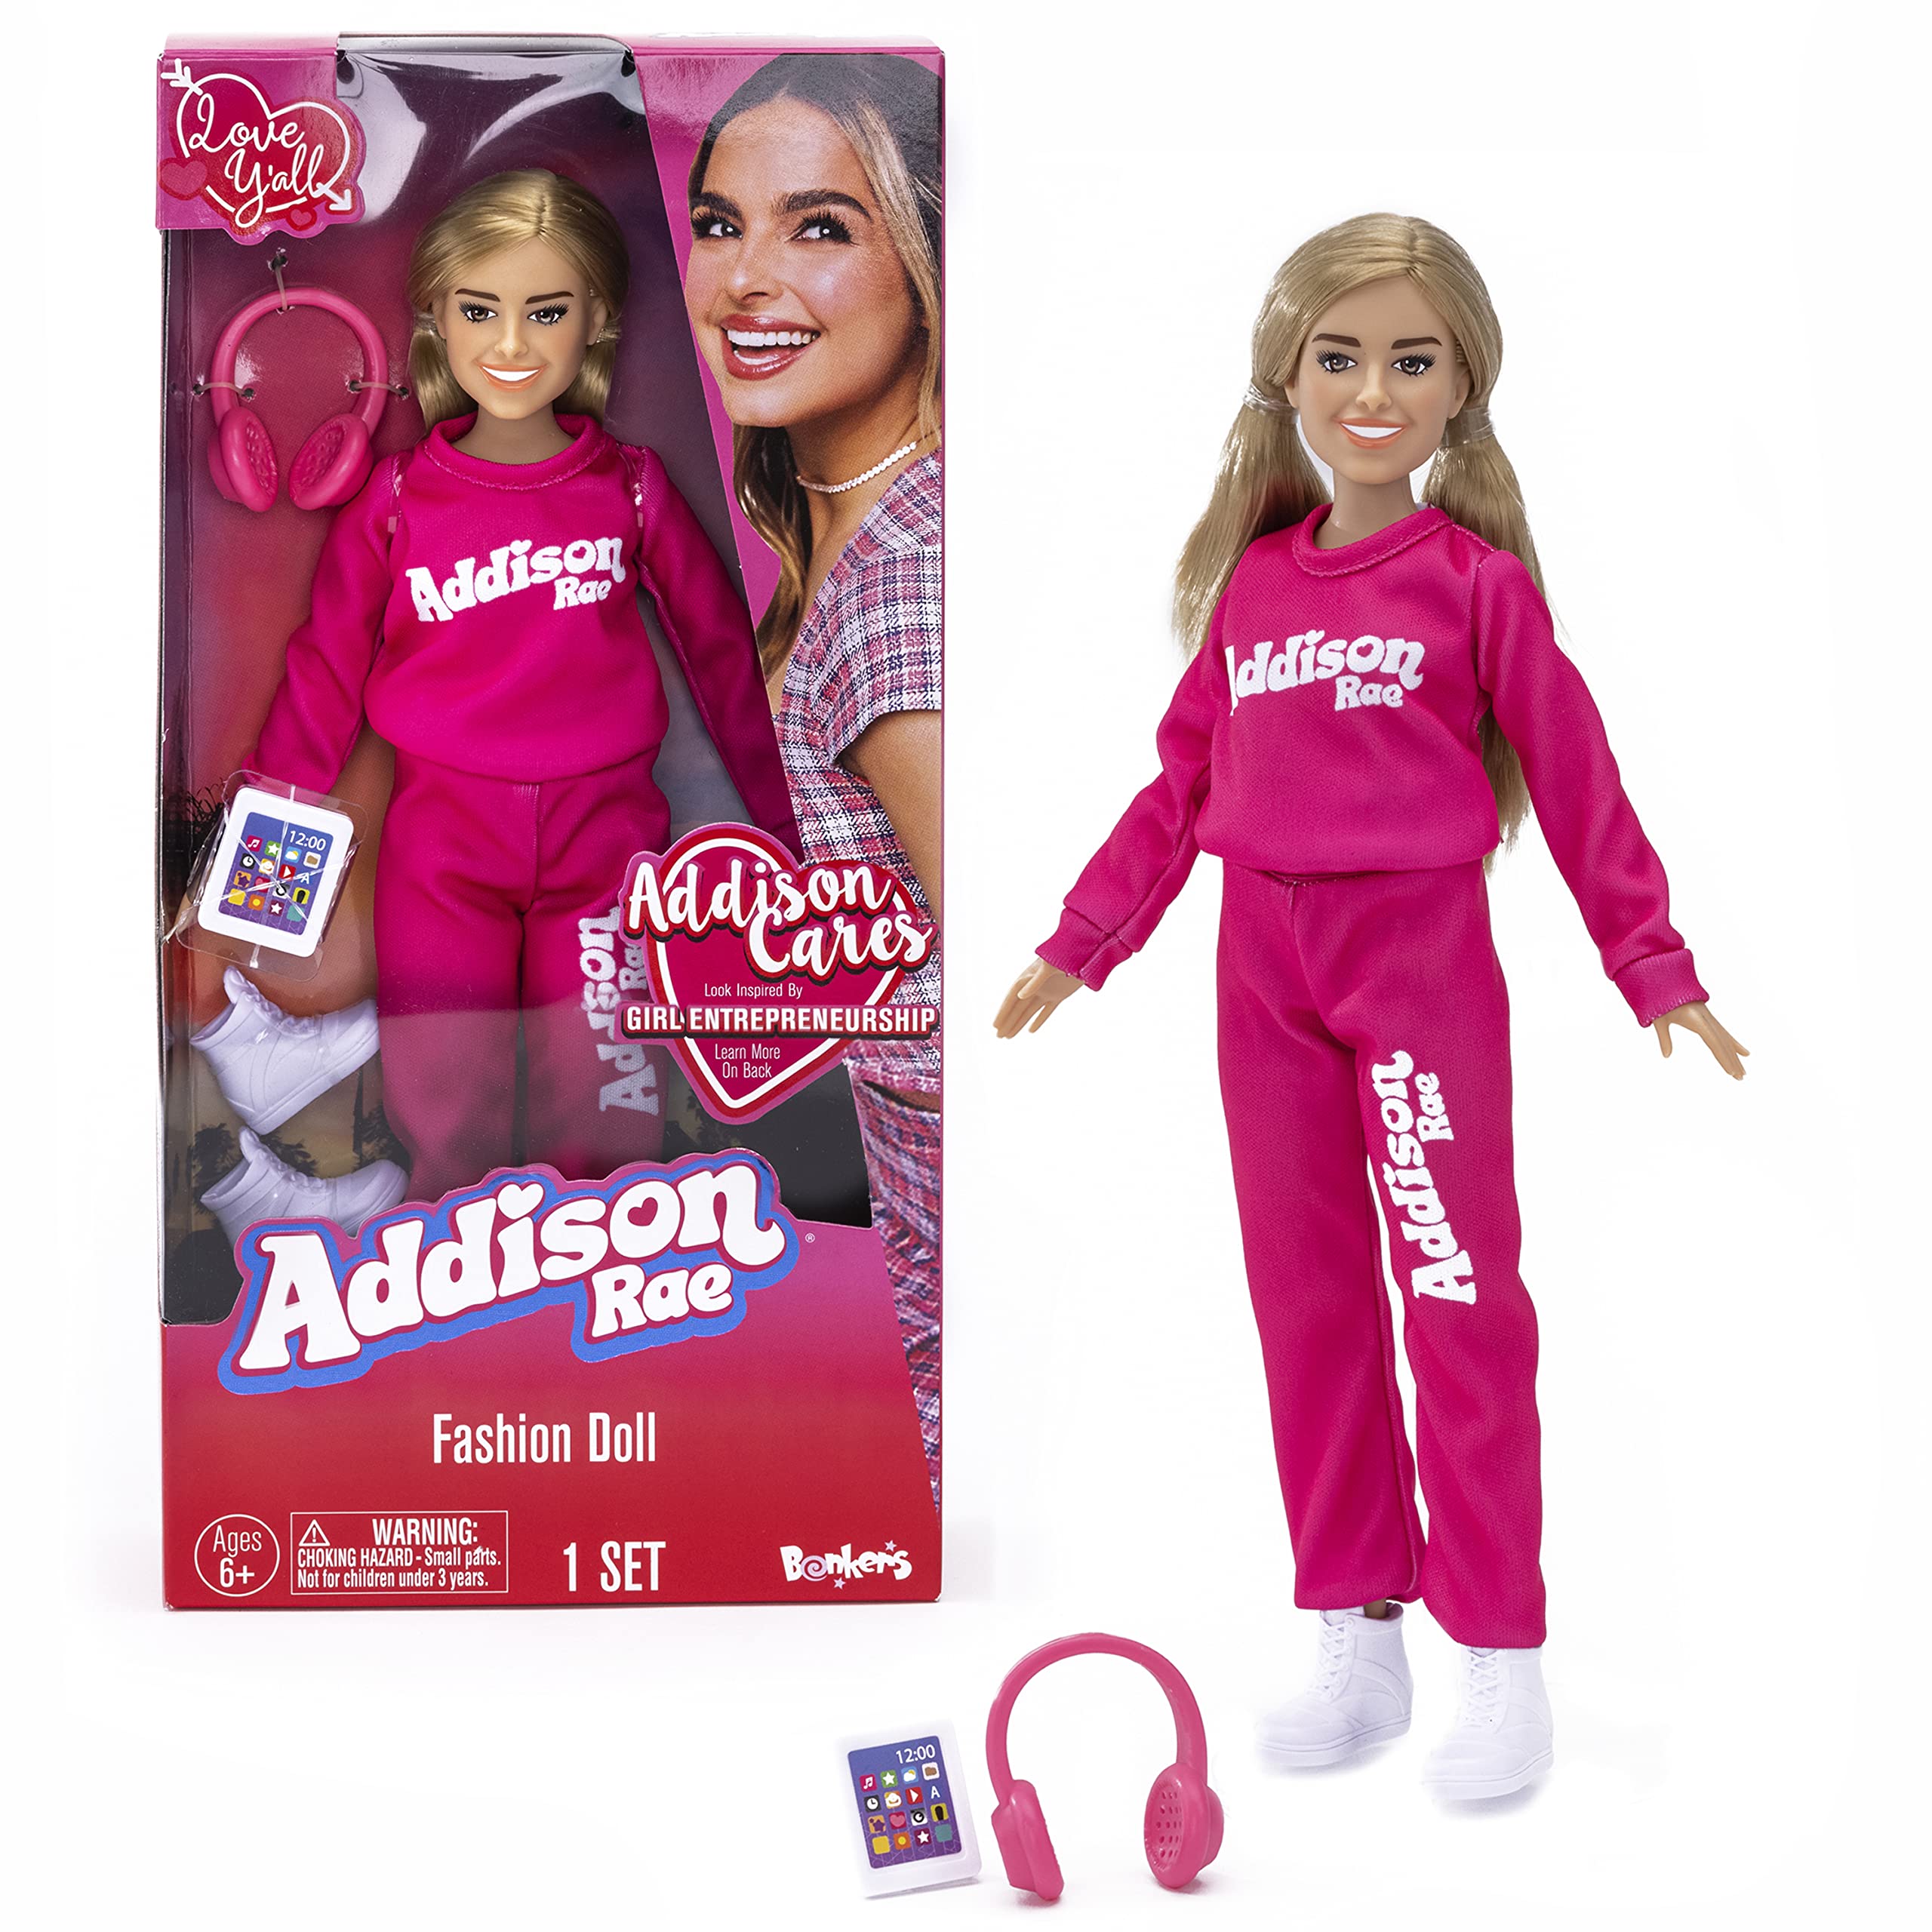 Addison Rae Fashion Doll - Comfy; Trendsetting Style; Contains 11” Doll and Accessories, Including Headphones, Tablet, and Sneakers